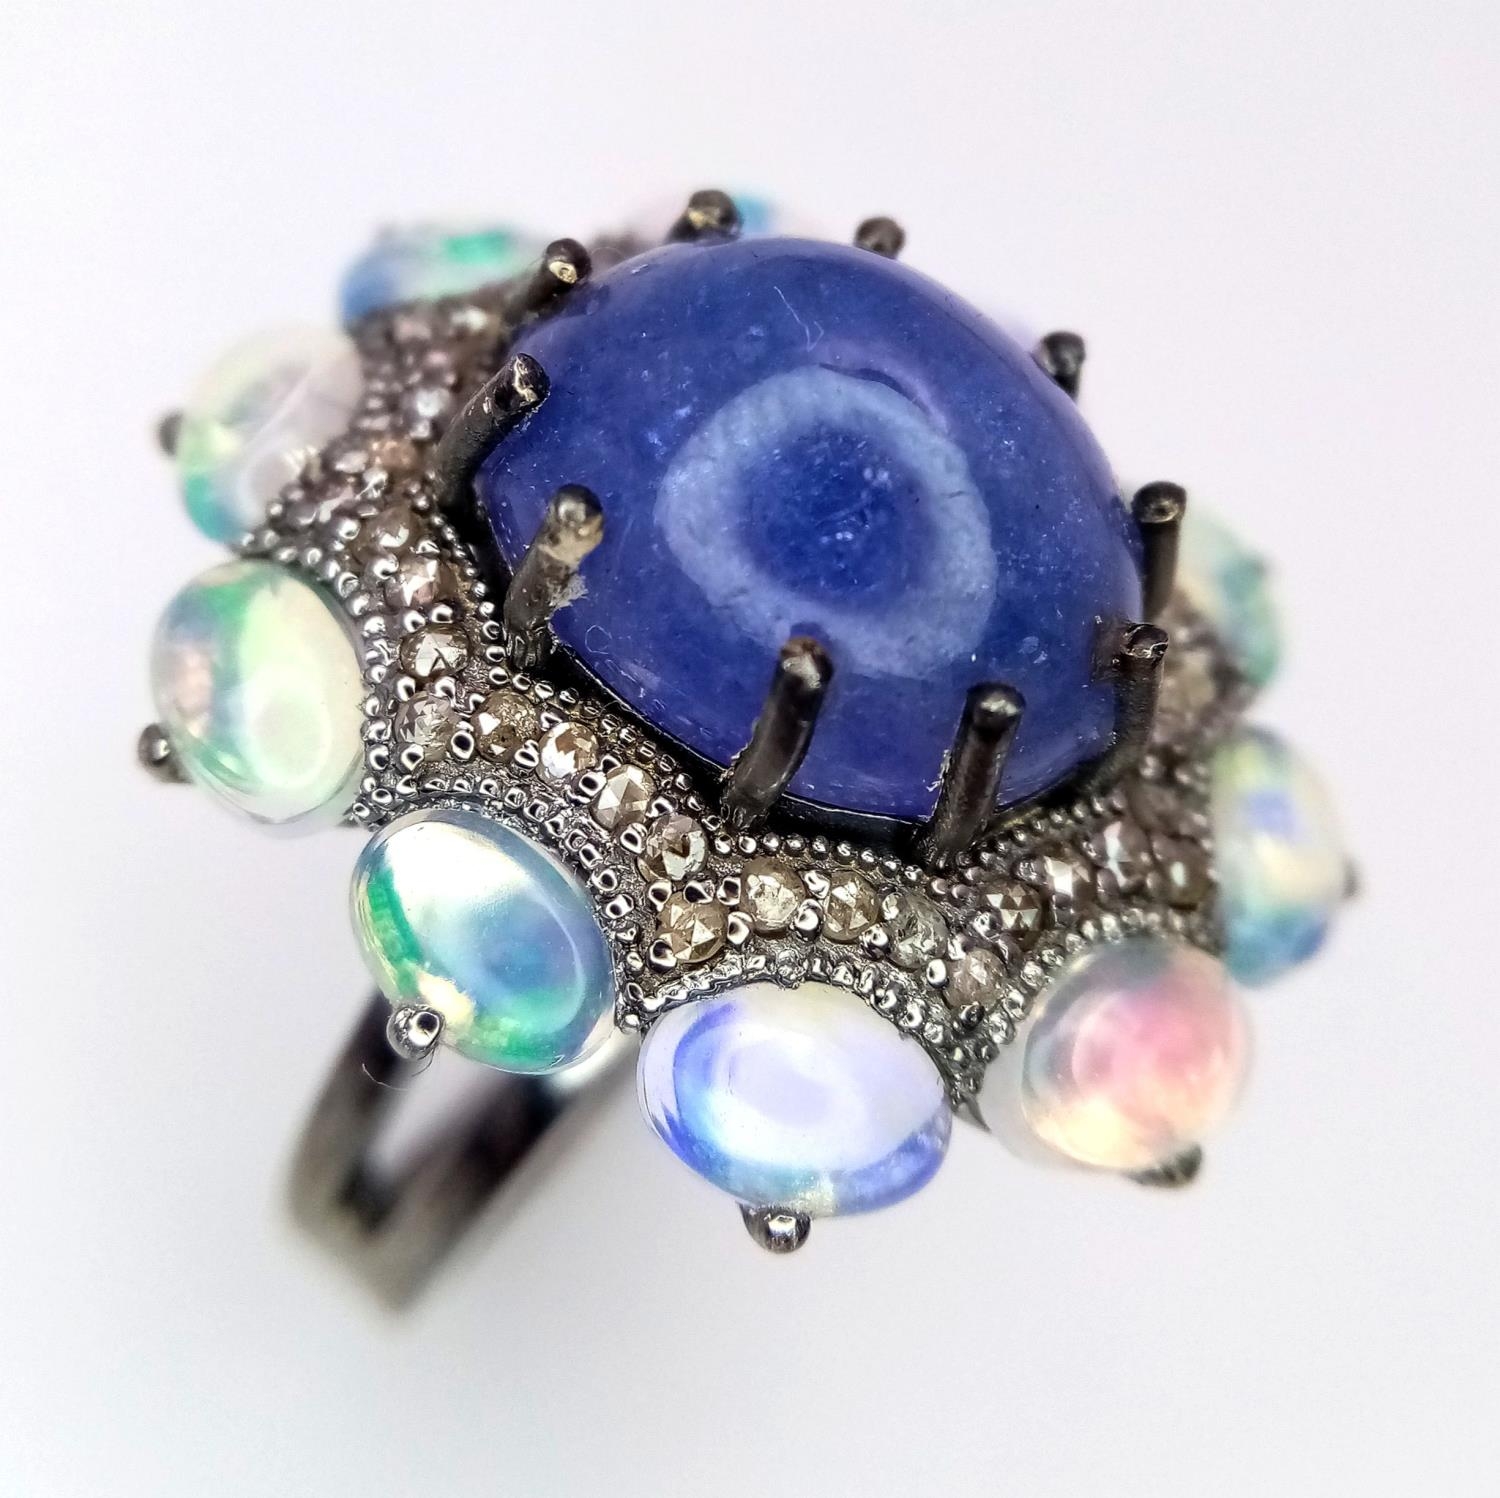 A 10ct Tanzanite Gemstone Dress Ring with 3ctw Opal Surround and 0.50ctw of Diamond Accents. Size N.